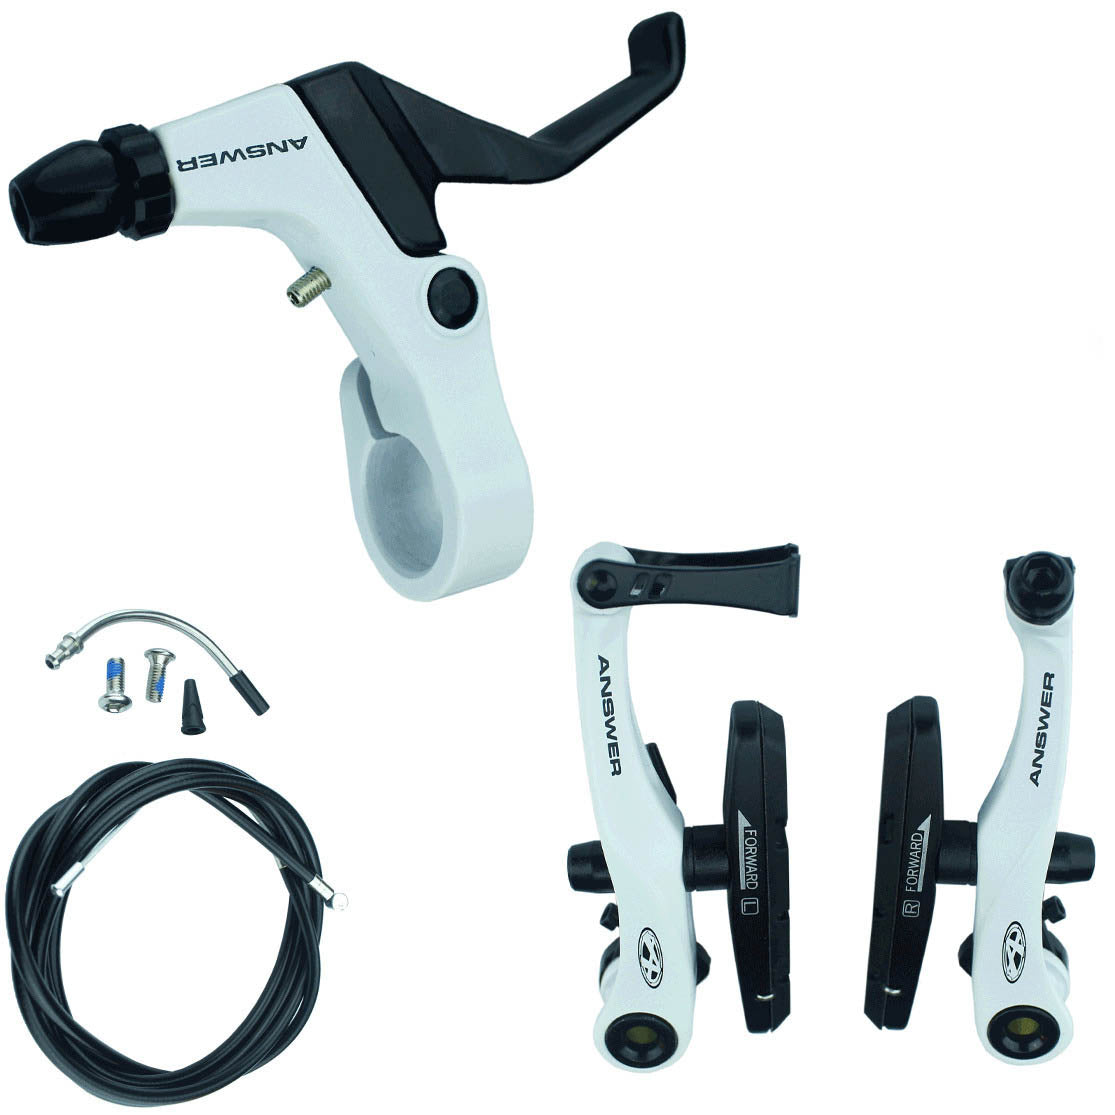 Sentence with product name: Answer Mini V-Brake Kit including a lever, cables, and forged aluminum brake arms, isolated on a white background.